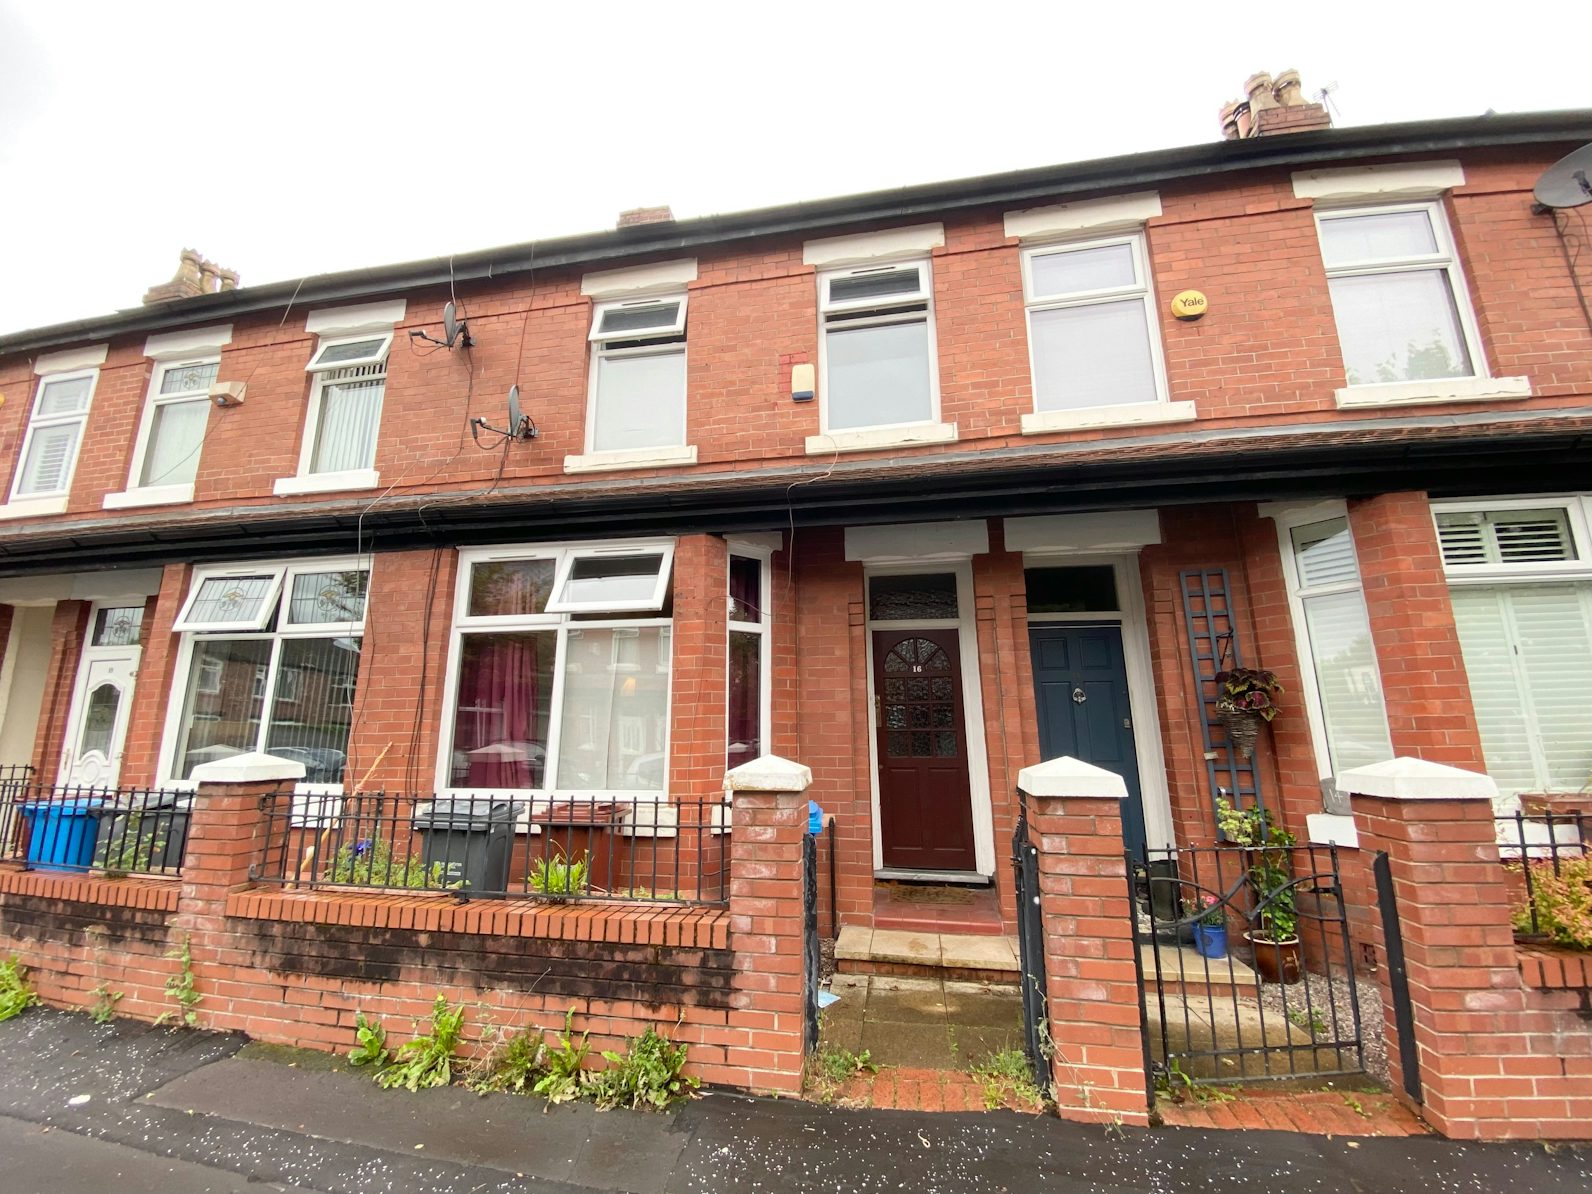 Terraced House for sale on Marlborough Avenue Manchester, M16